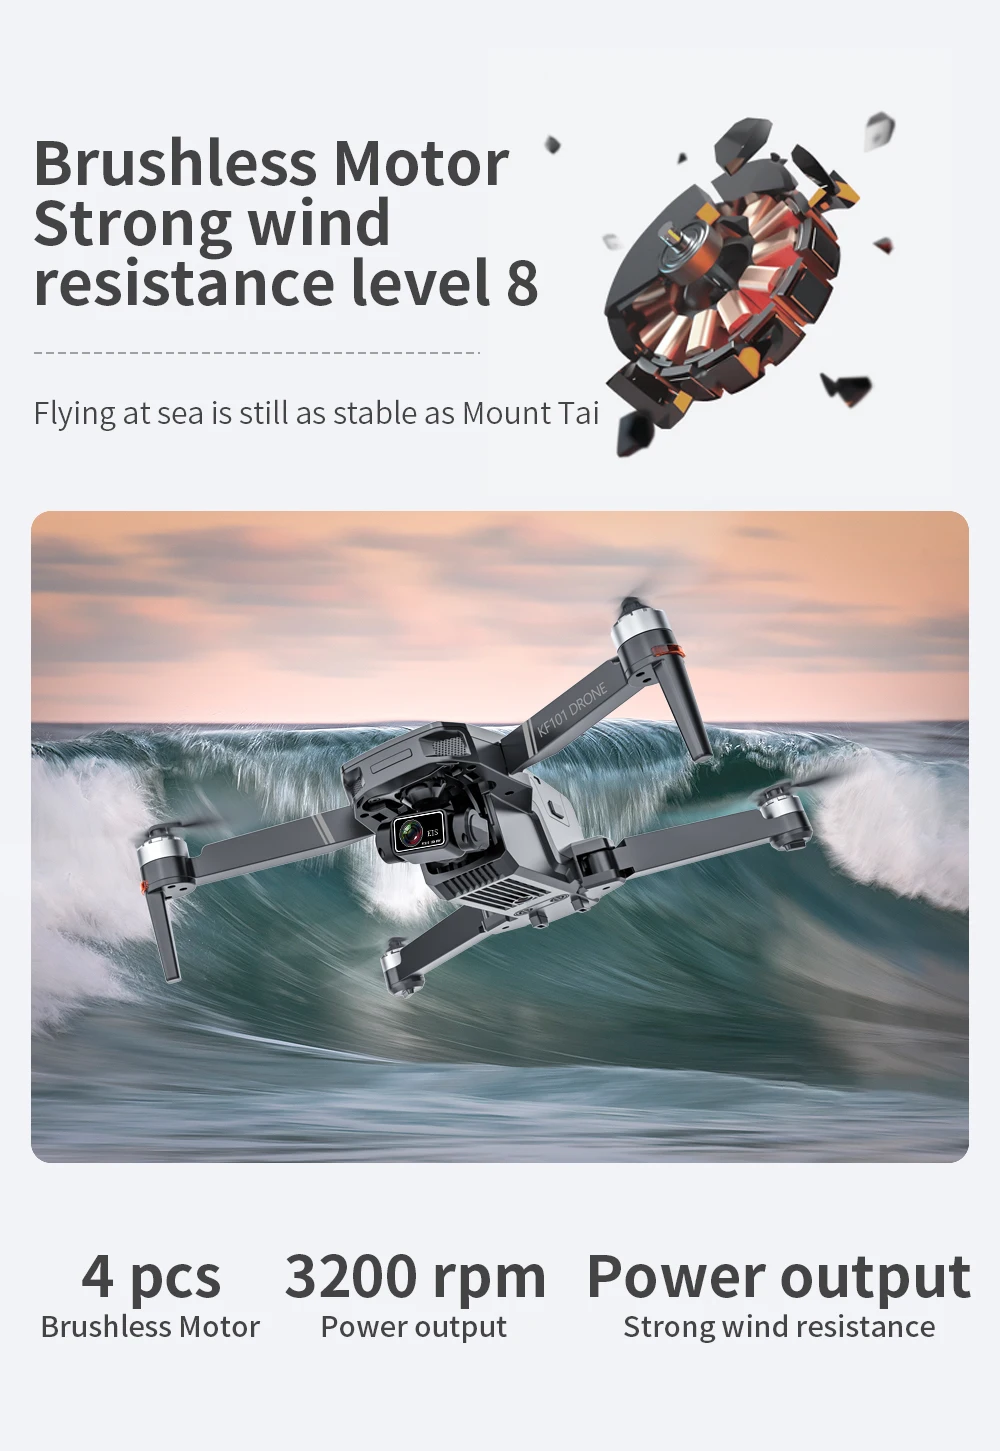 New GPS Drone, Brushless Motor wind sesistance level 8 Flying at sea is still as stable as Mount